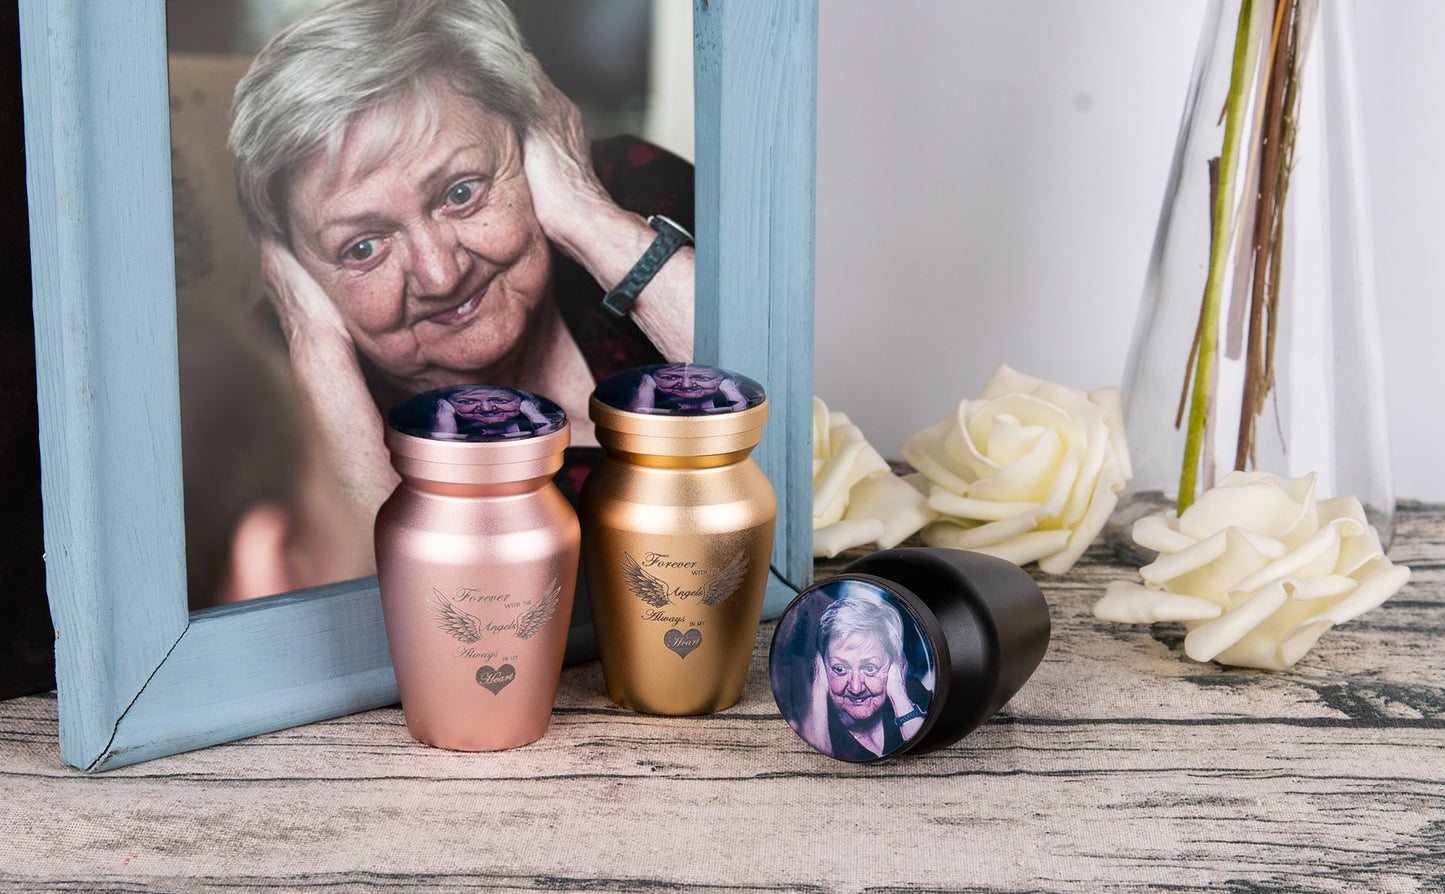 cremation urns and keepsakes